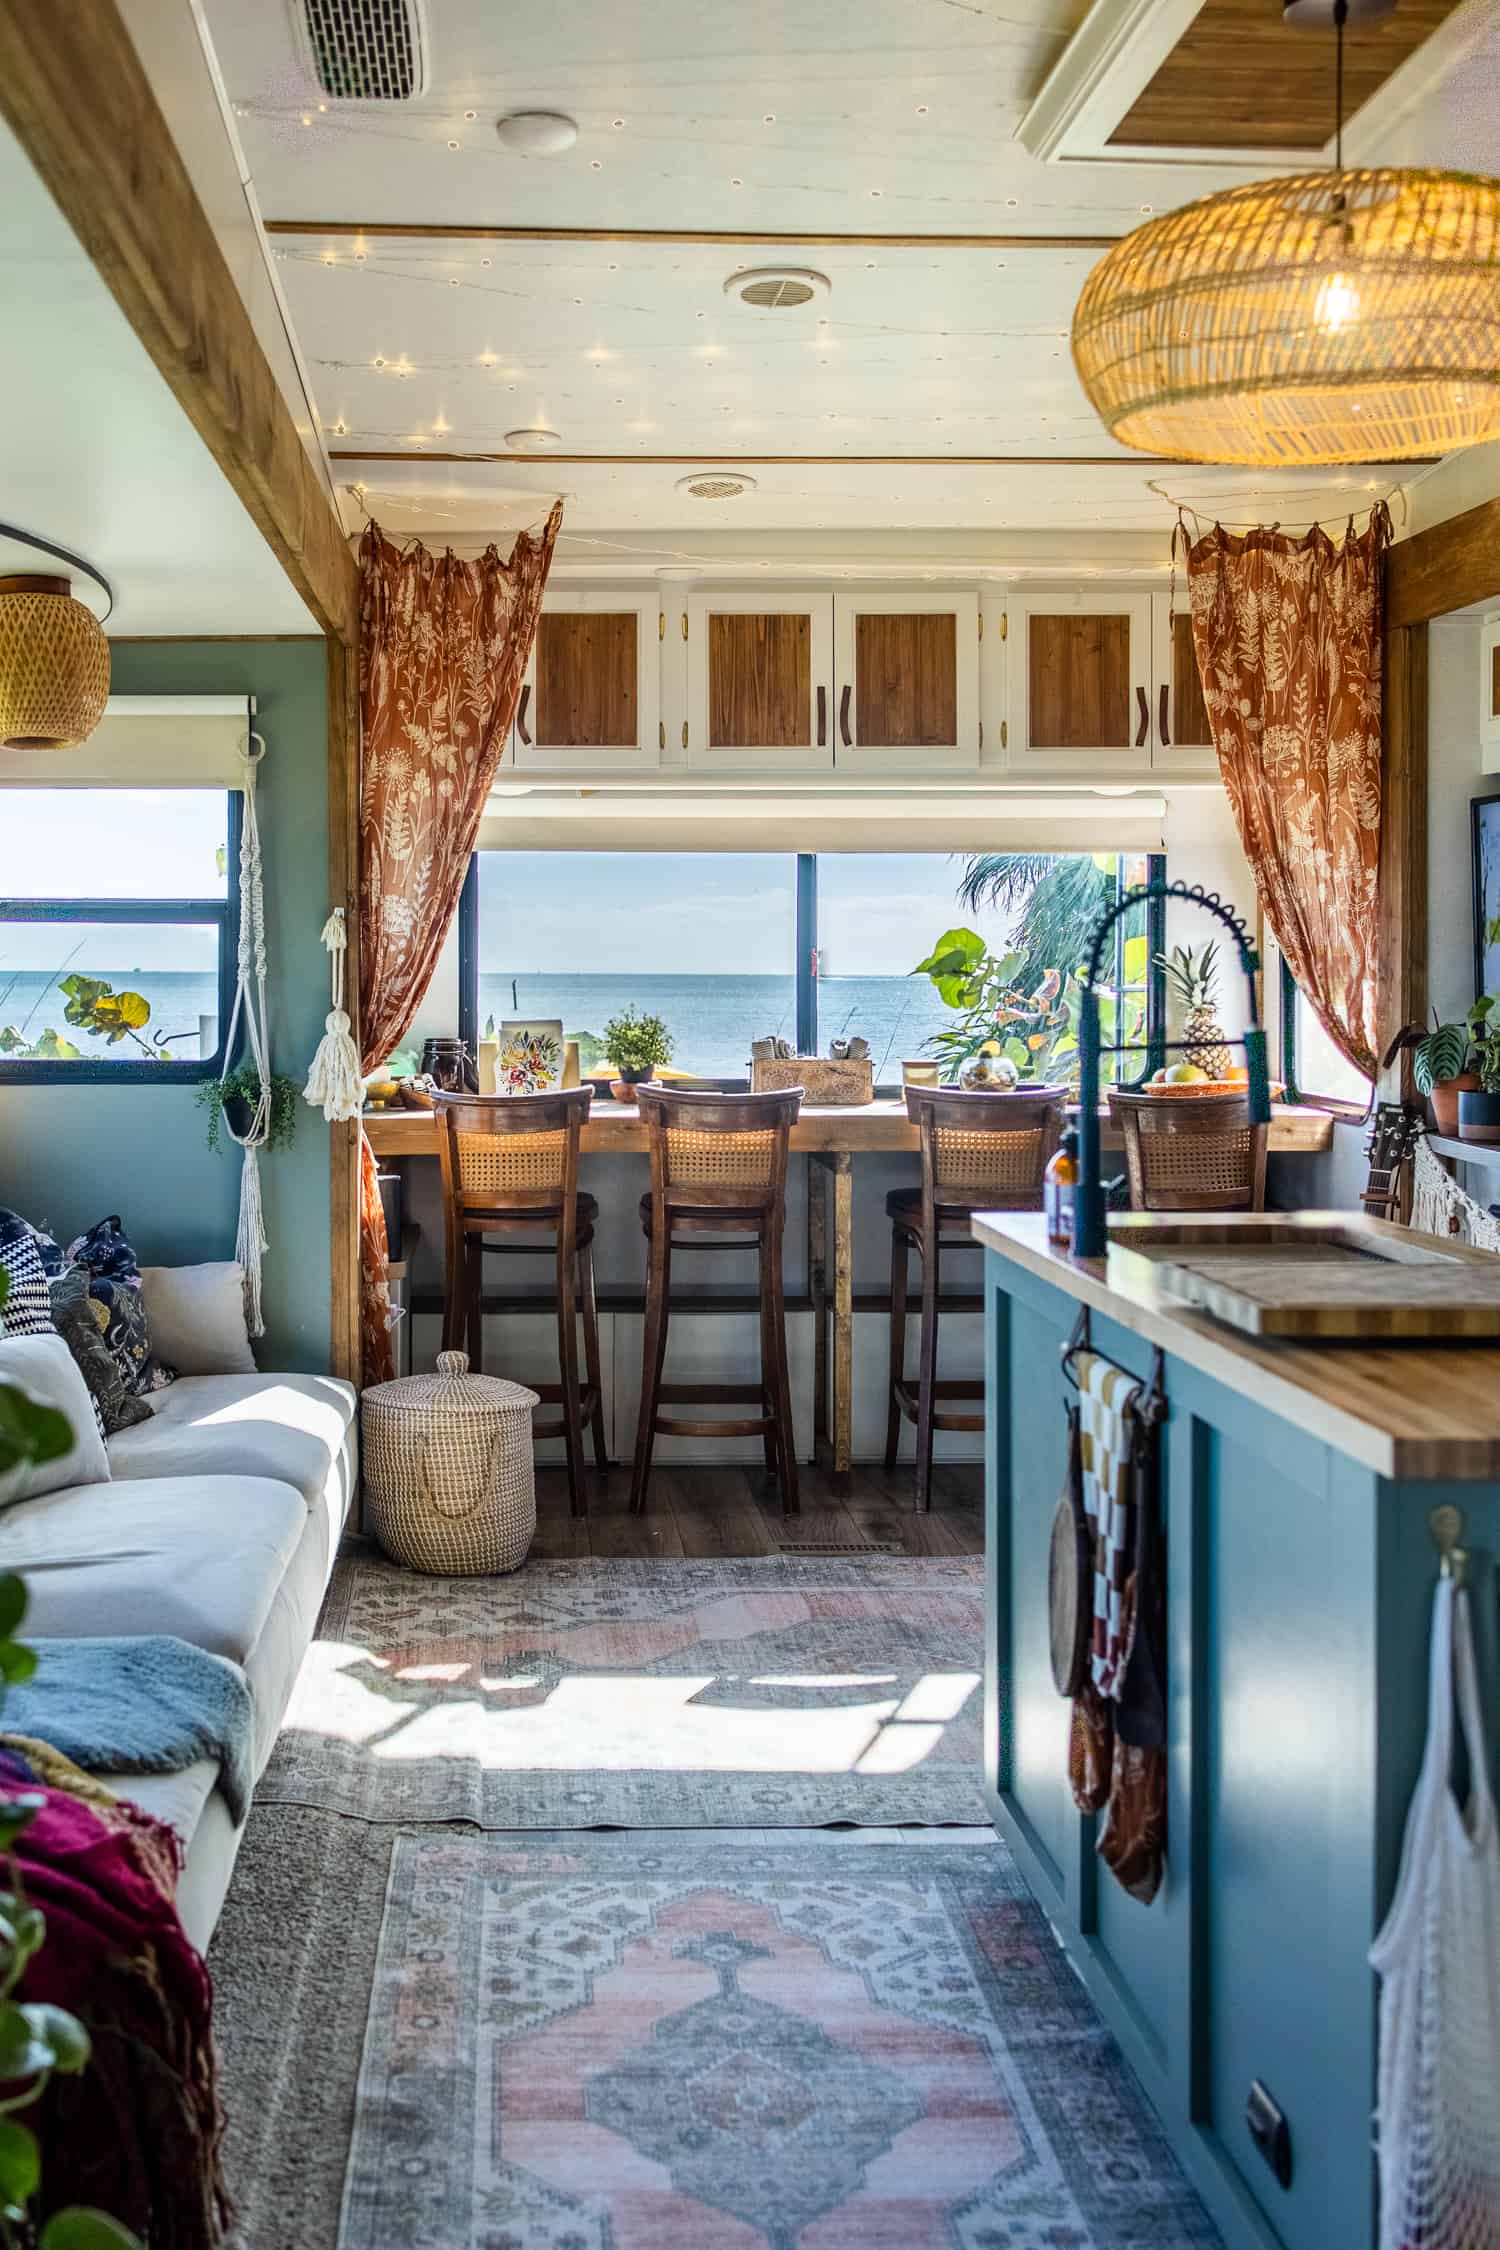 Amazing camper renovation with brown woodsy features, rustic chairs and colorful rugs.